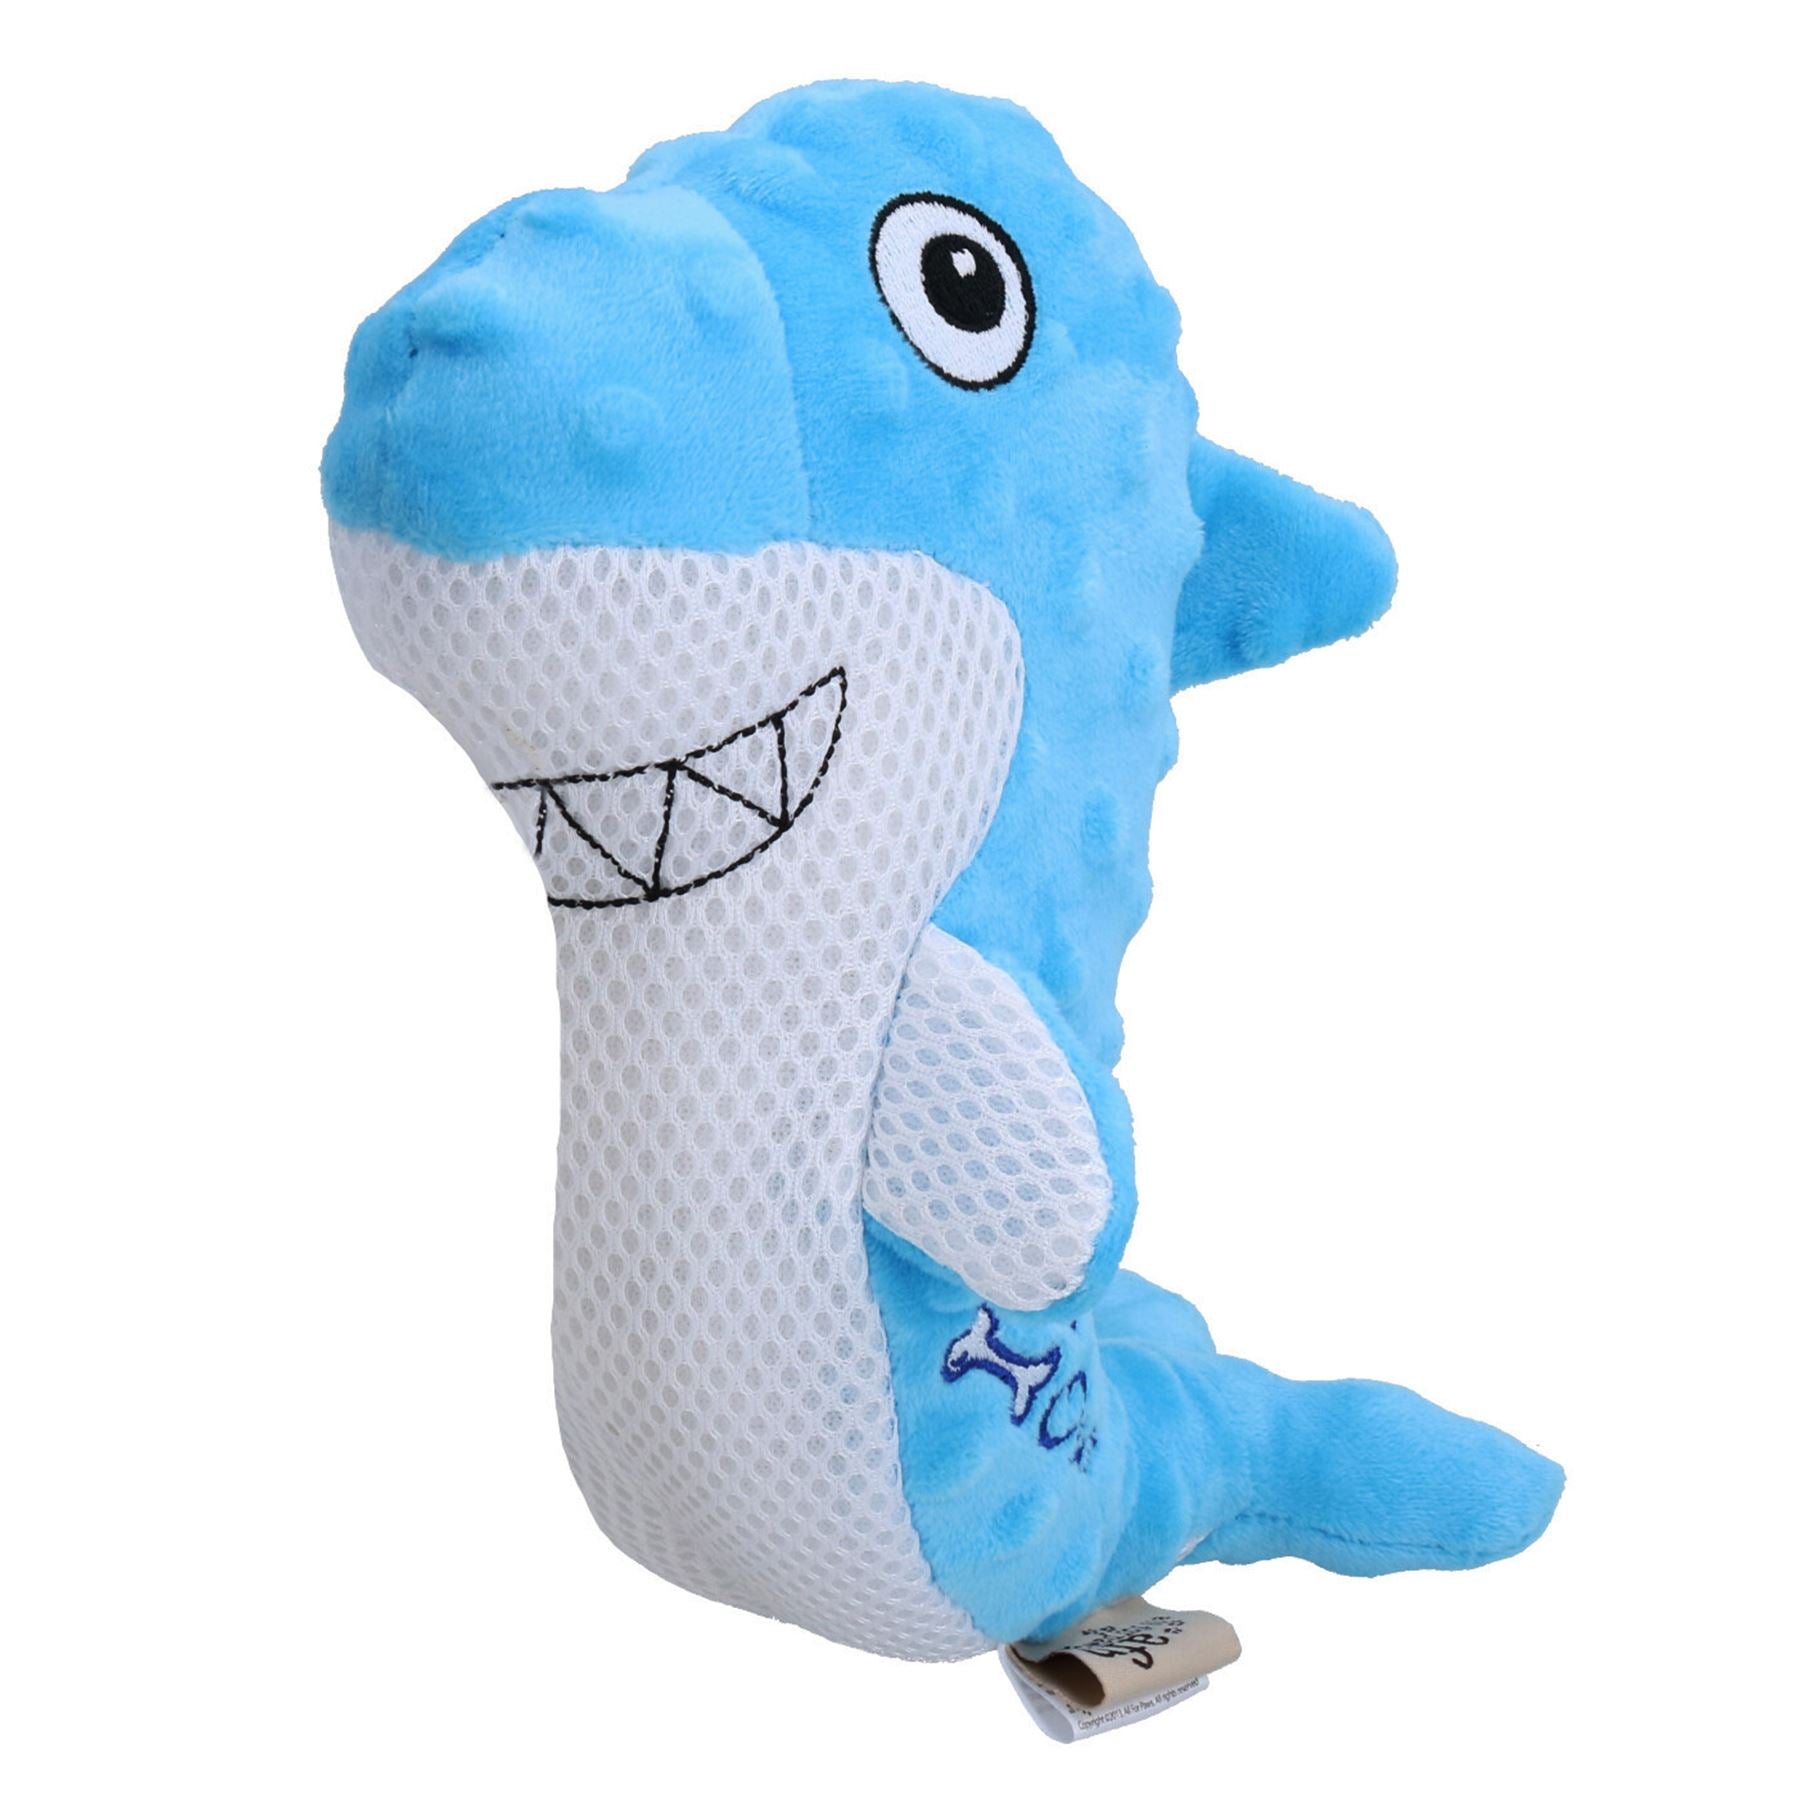 Chill Out Shark Dog Plush Hydration Cooling Summer Play Toy Home Pet Toy